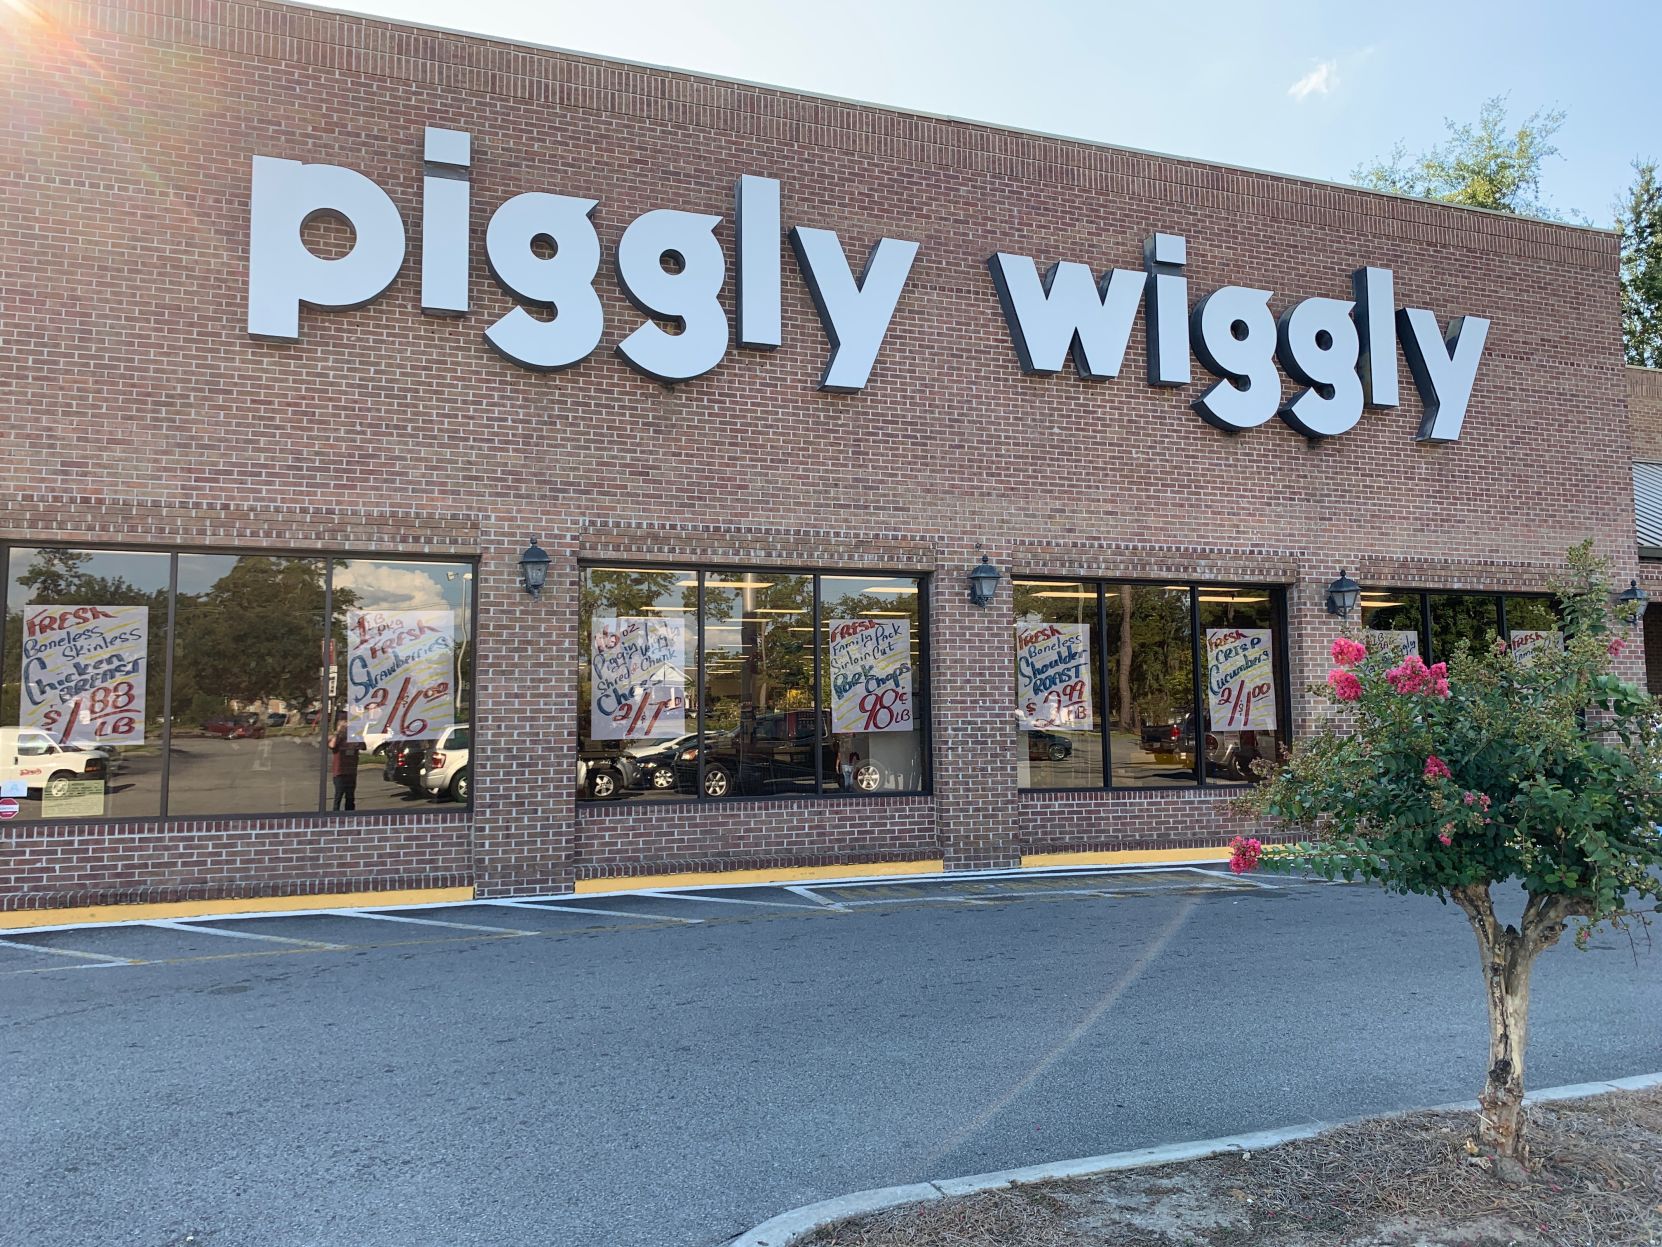 piggly wiggly warehouse